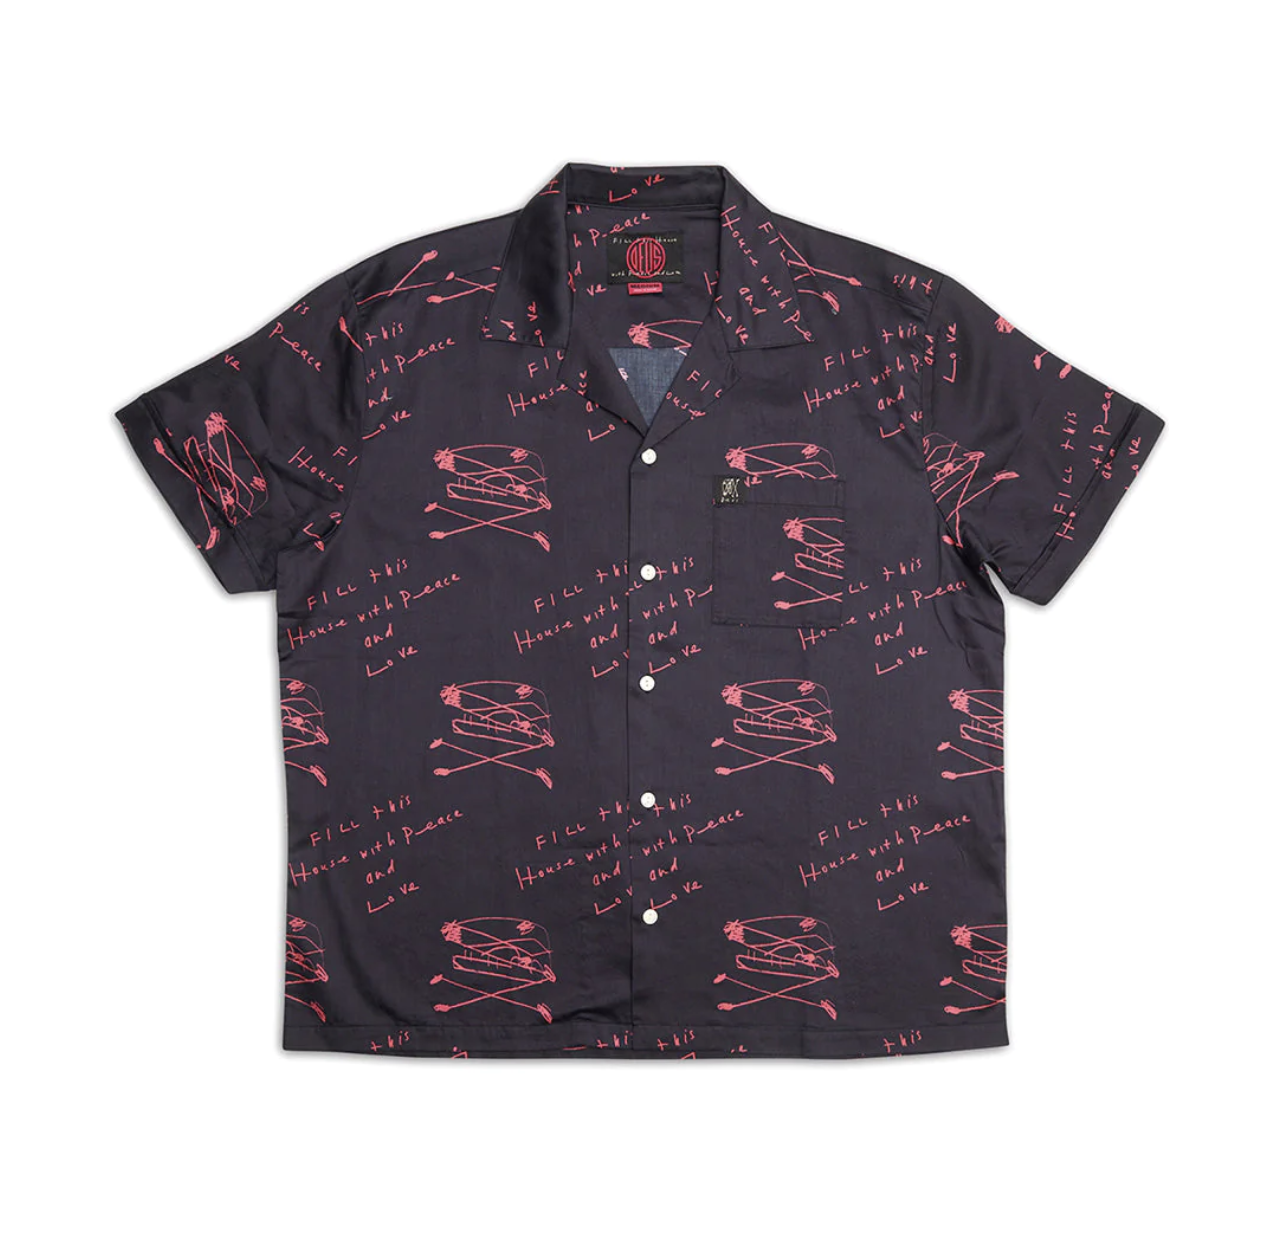 Old House Shirt - Black/Red